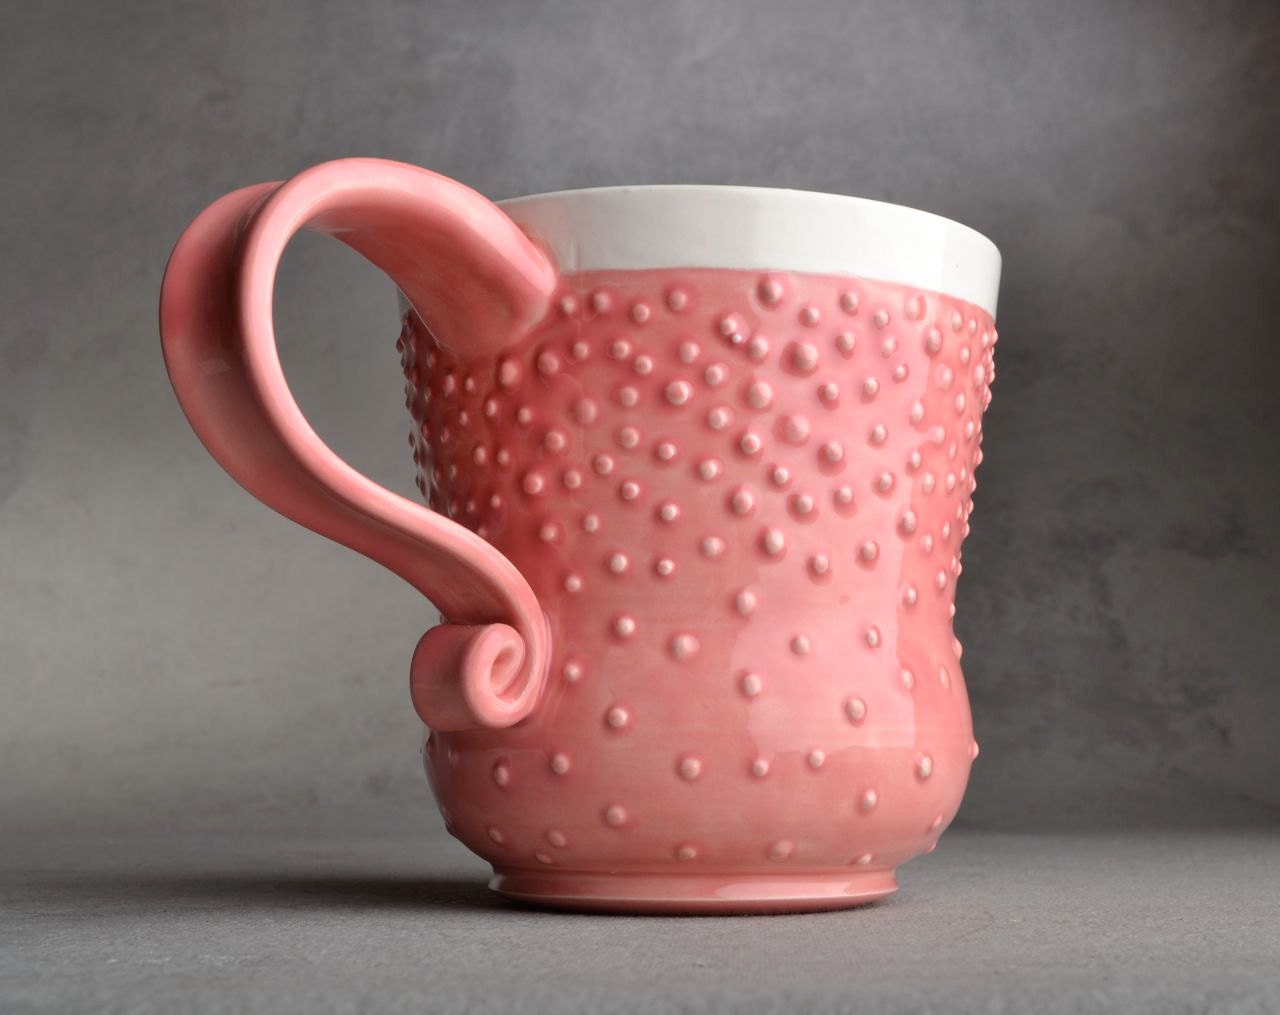 Curvy Dottie Mug Made To Order Pink And White Dottie Mug by Symmetrical Pottery - symmetricalpottery